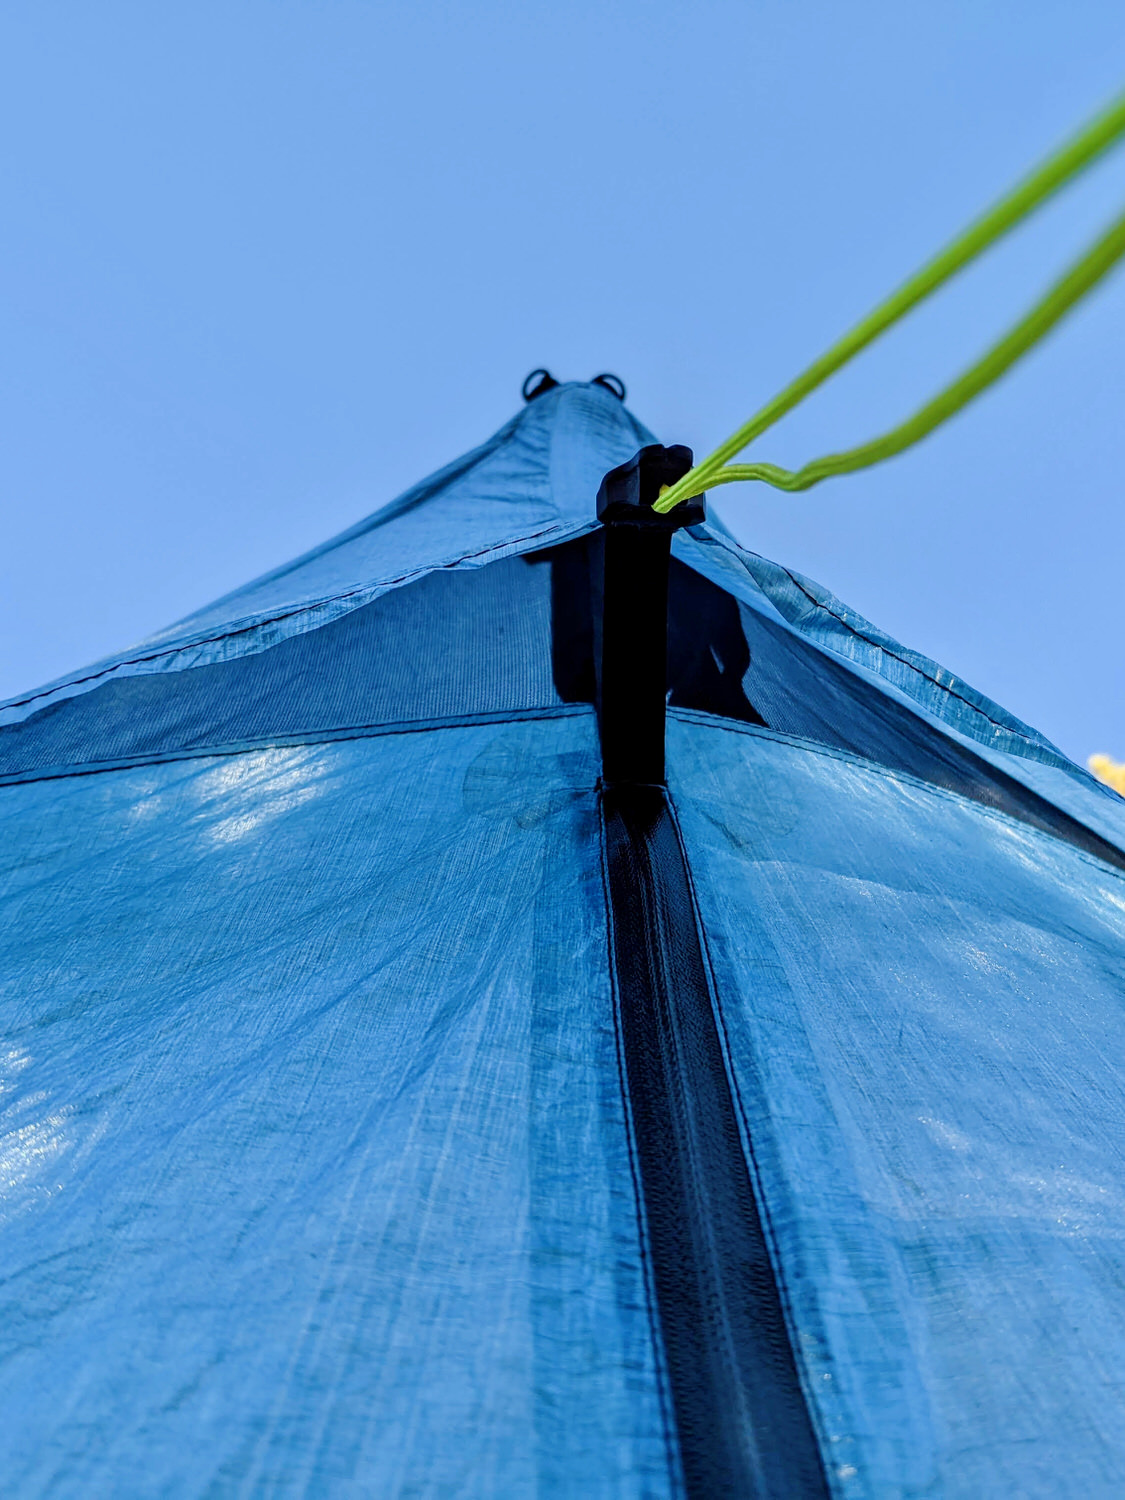 The top peak with ventilation of the Zpacks Duplex Zip tent with blue sky in the background